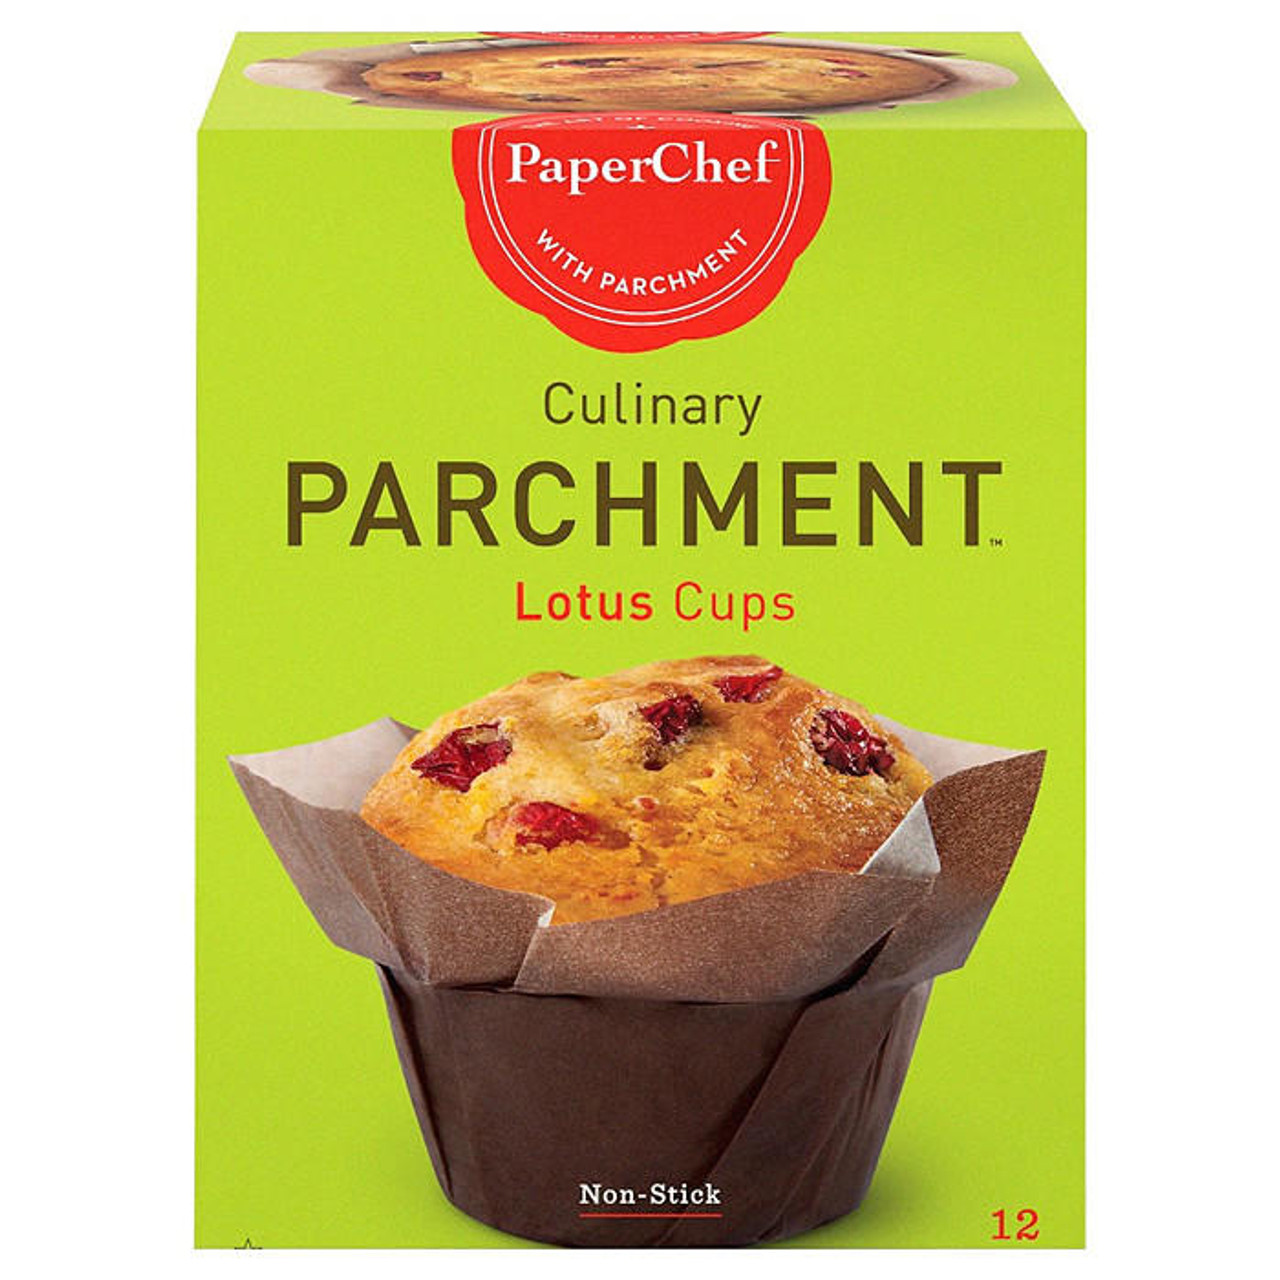 Paper Chef Culinary Parchment Baking Cups, Nonstick, Large - 60 cups